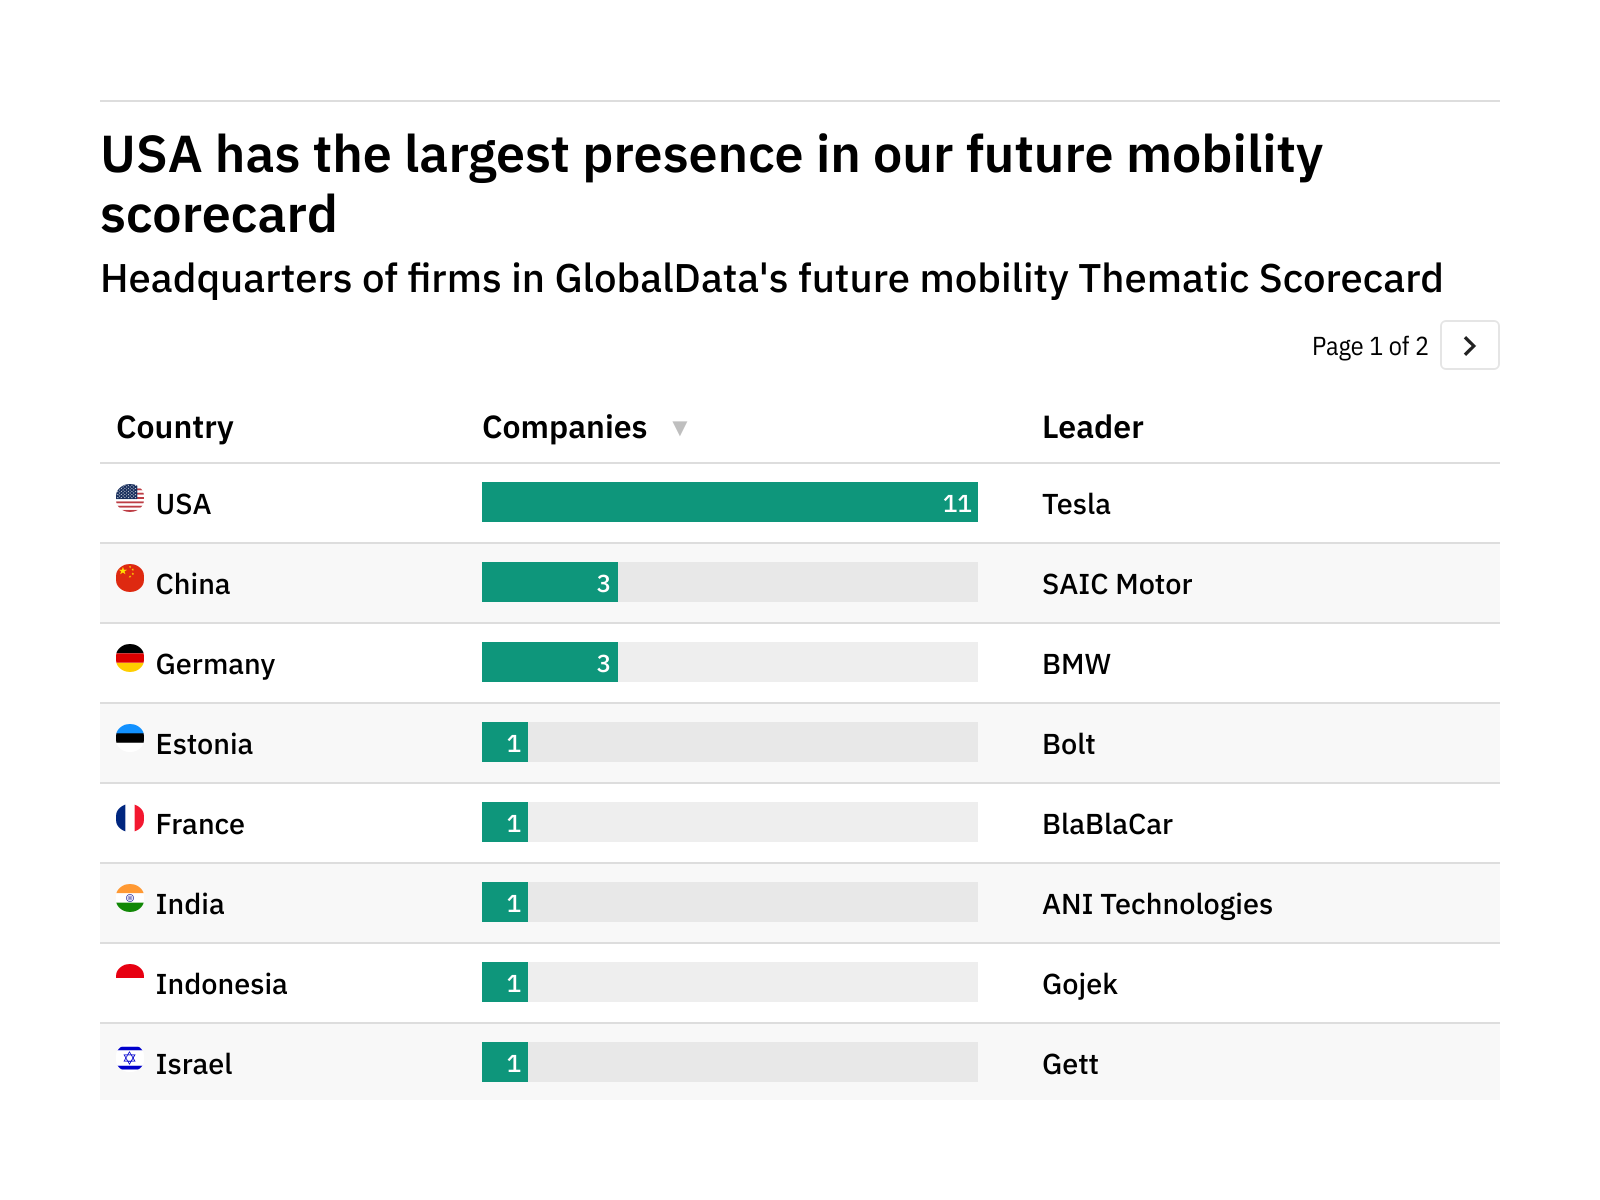 Revealed: the future mobility companies best positioned to weather future industry disruption